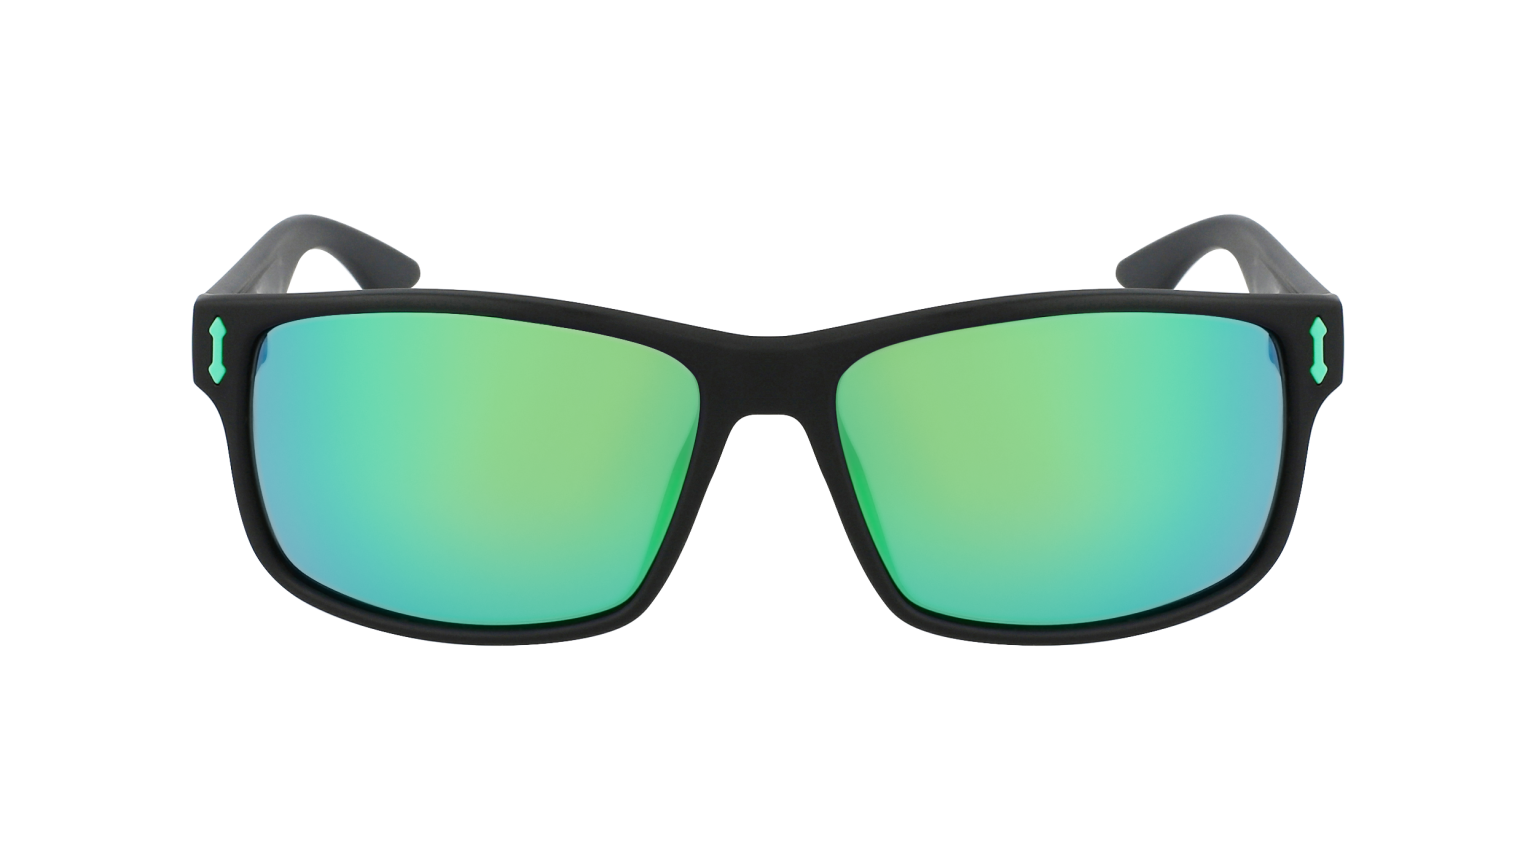 COUNT - Matte Black H2O with Polarized Lumalens Green Ionized Lens